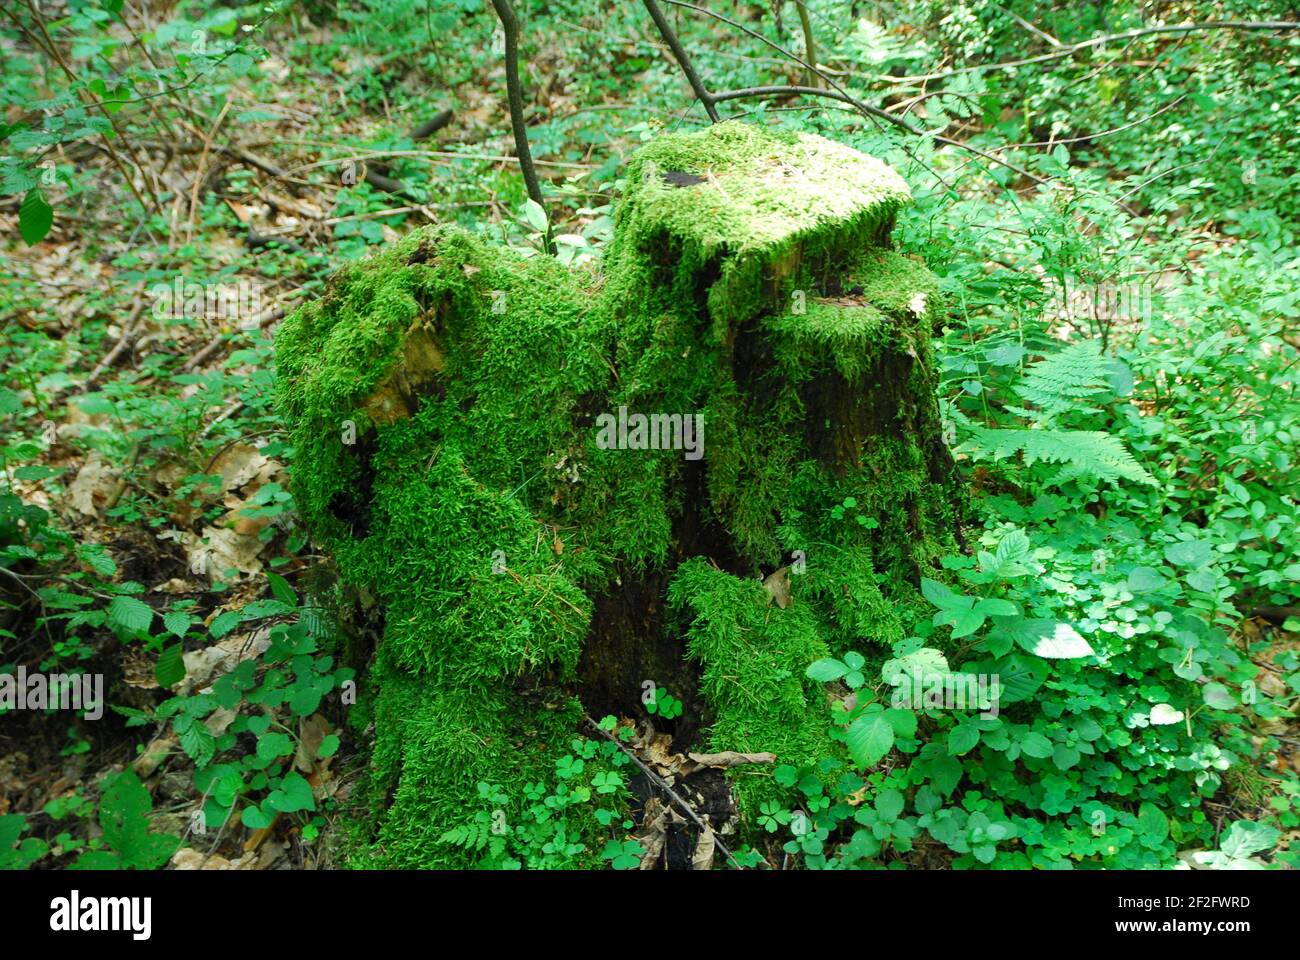 Old stump, stump, mossy, forest, green forest, forest grass Stock Photo